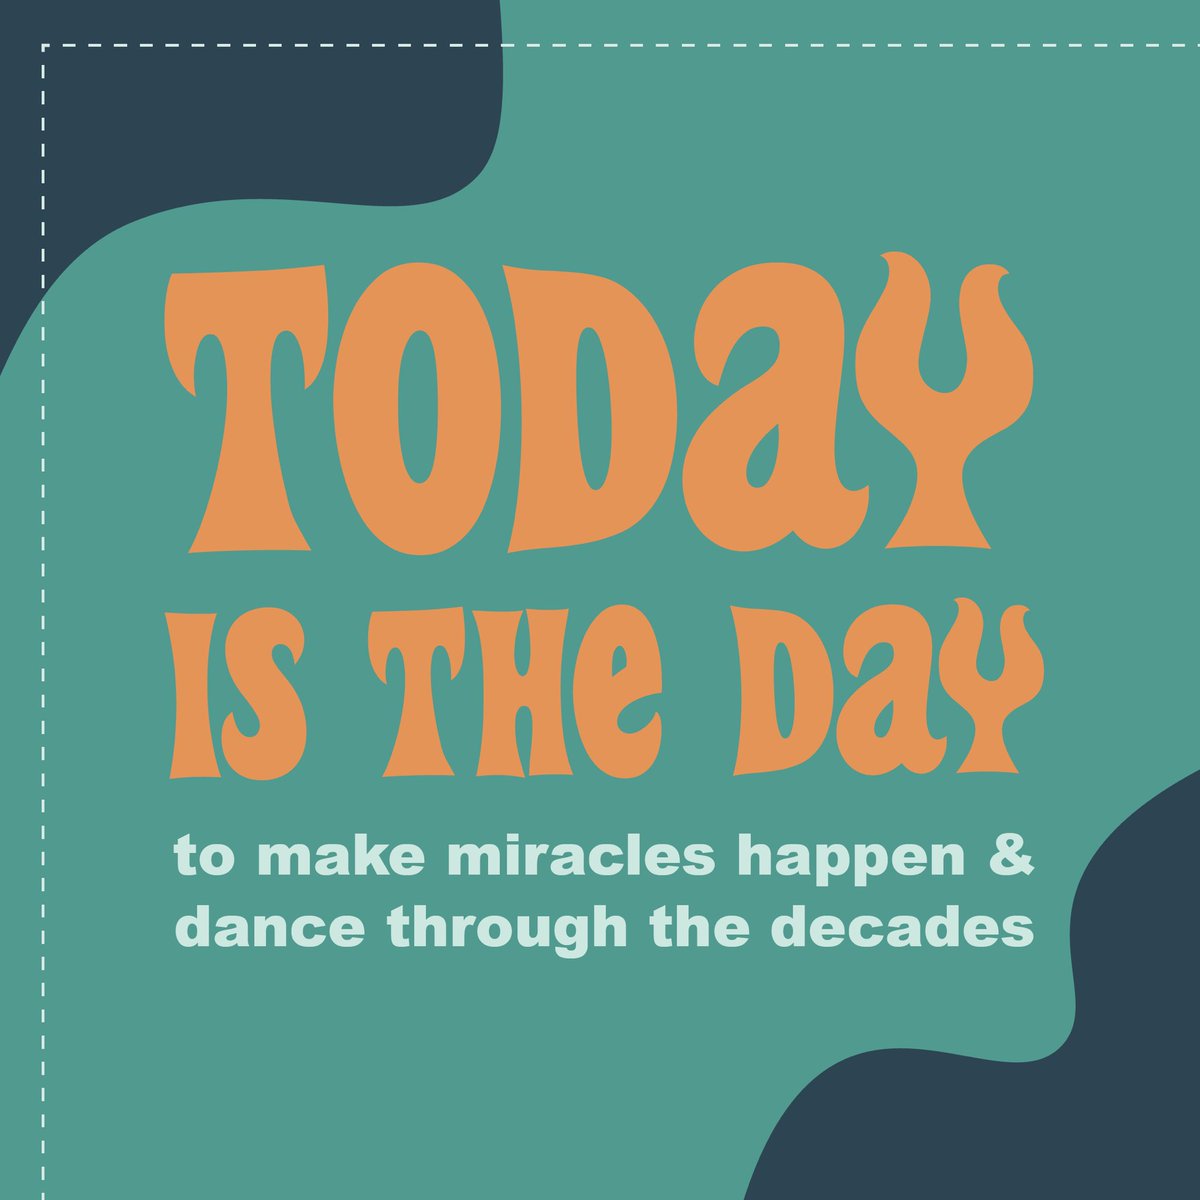 ITS FINALLY HERE! BIG EVENT DAY 🥳 Doors open at 7 AM. Please be here no later than 7:45 AM in Levick and be ready for a jam packed day filled with fun and celebration of our miracles! Let’s get to it! #dancingformiracles #dancingthroughthedecades #ChangeKidsHealth #wcdm14